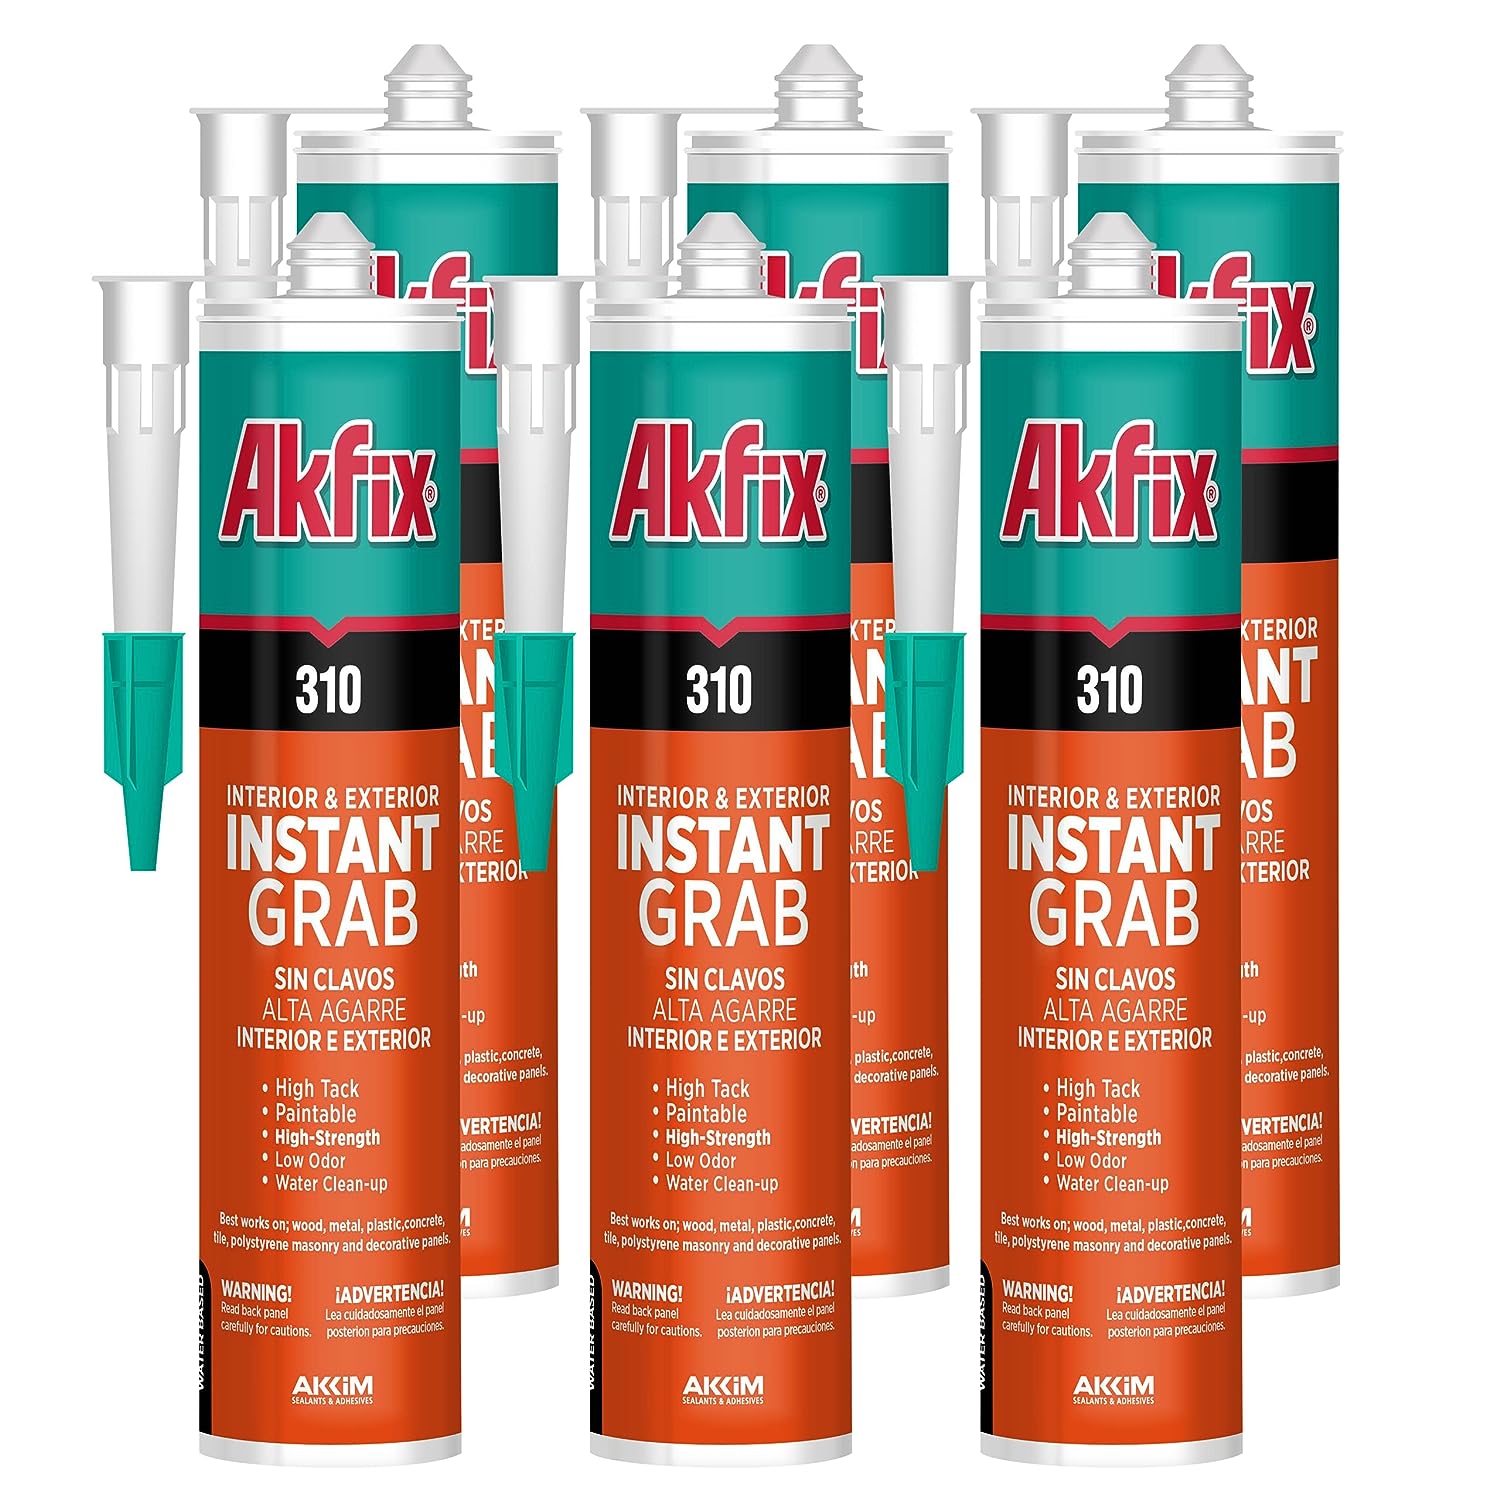 Greenfix - perfect adhesive solution for crafts, wall hanging, secure items  in place